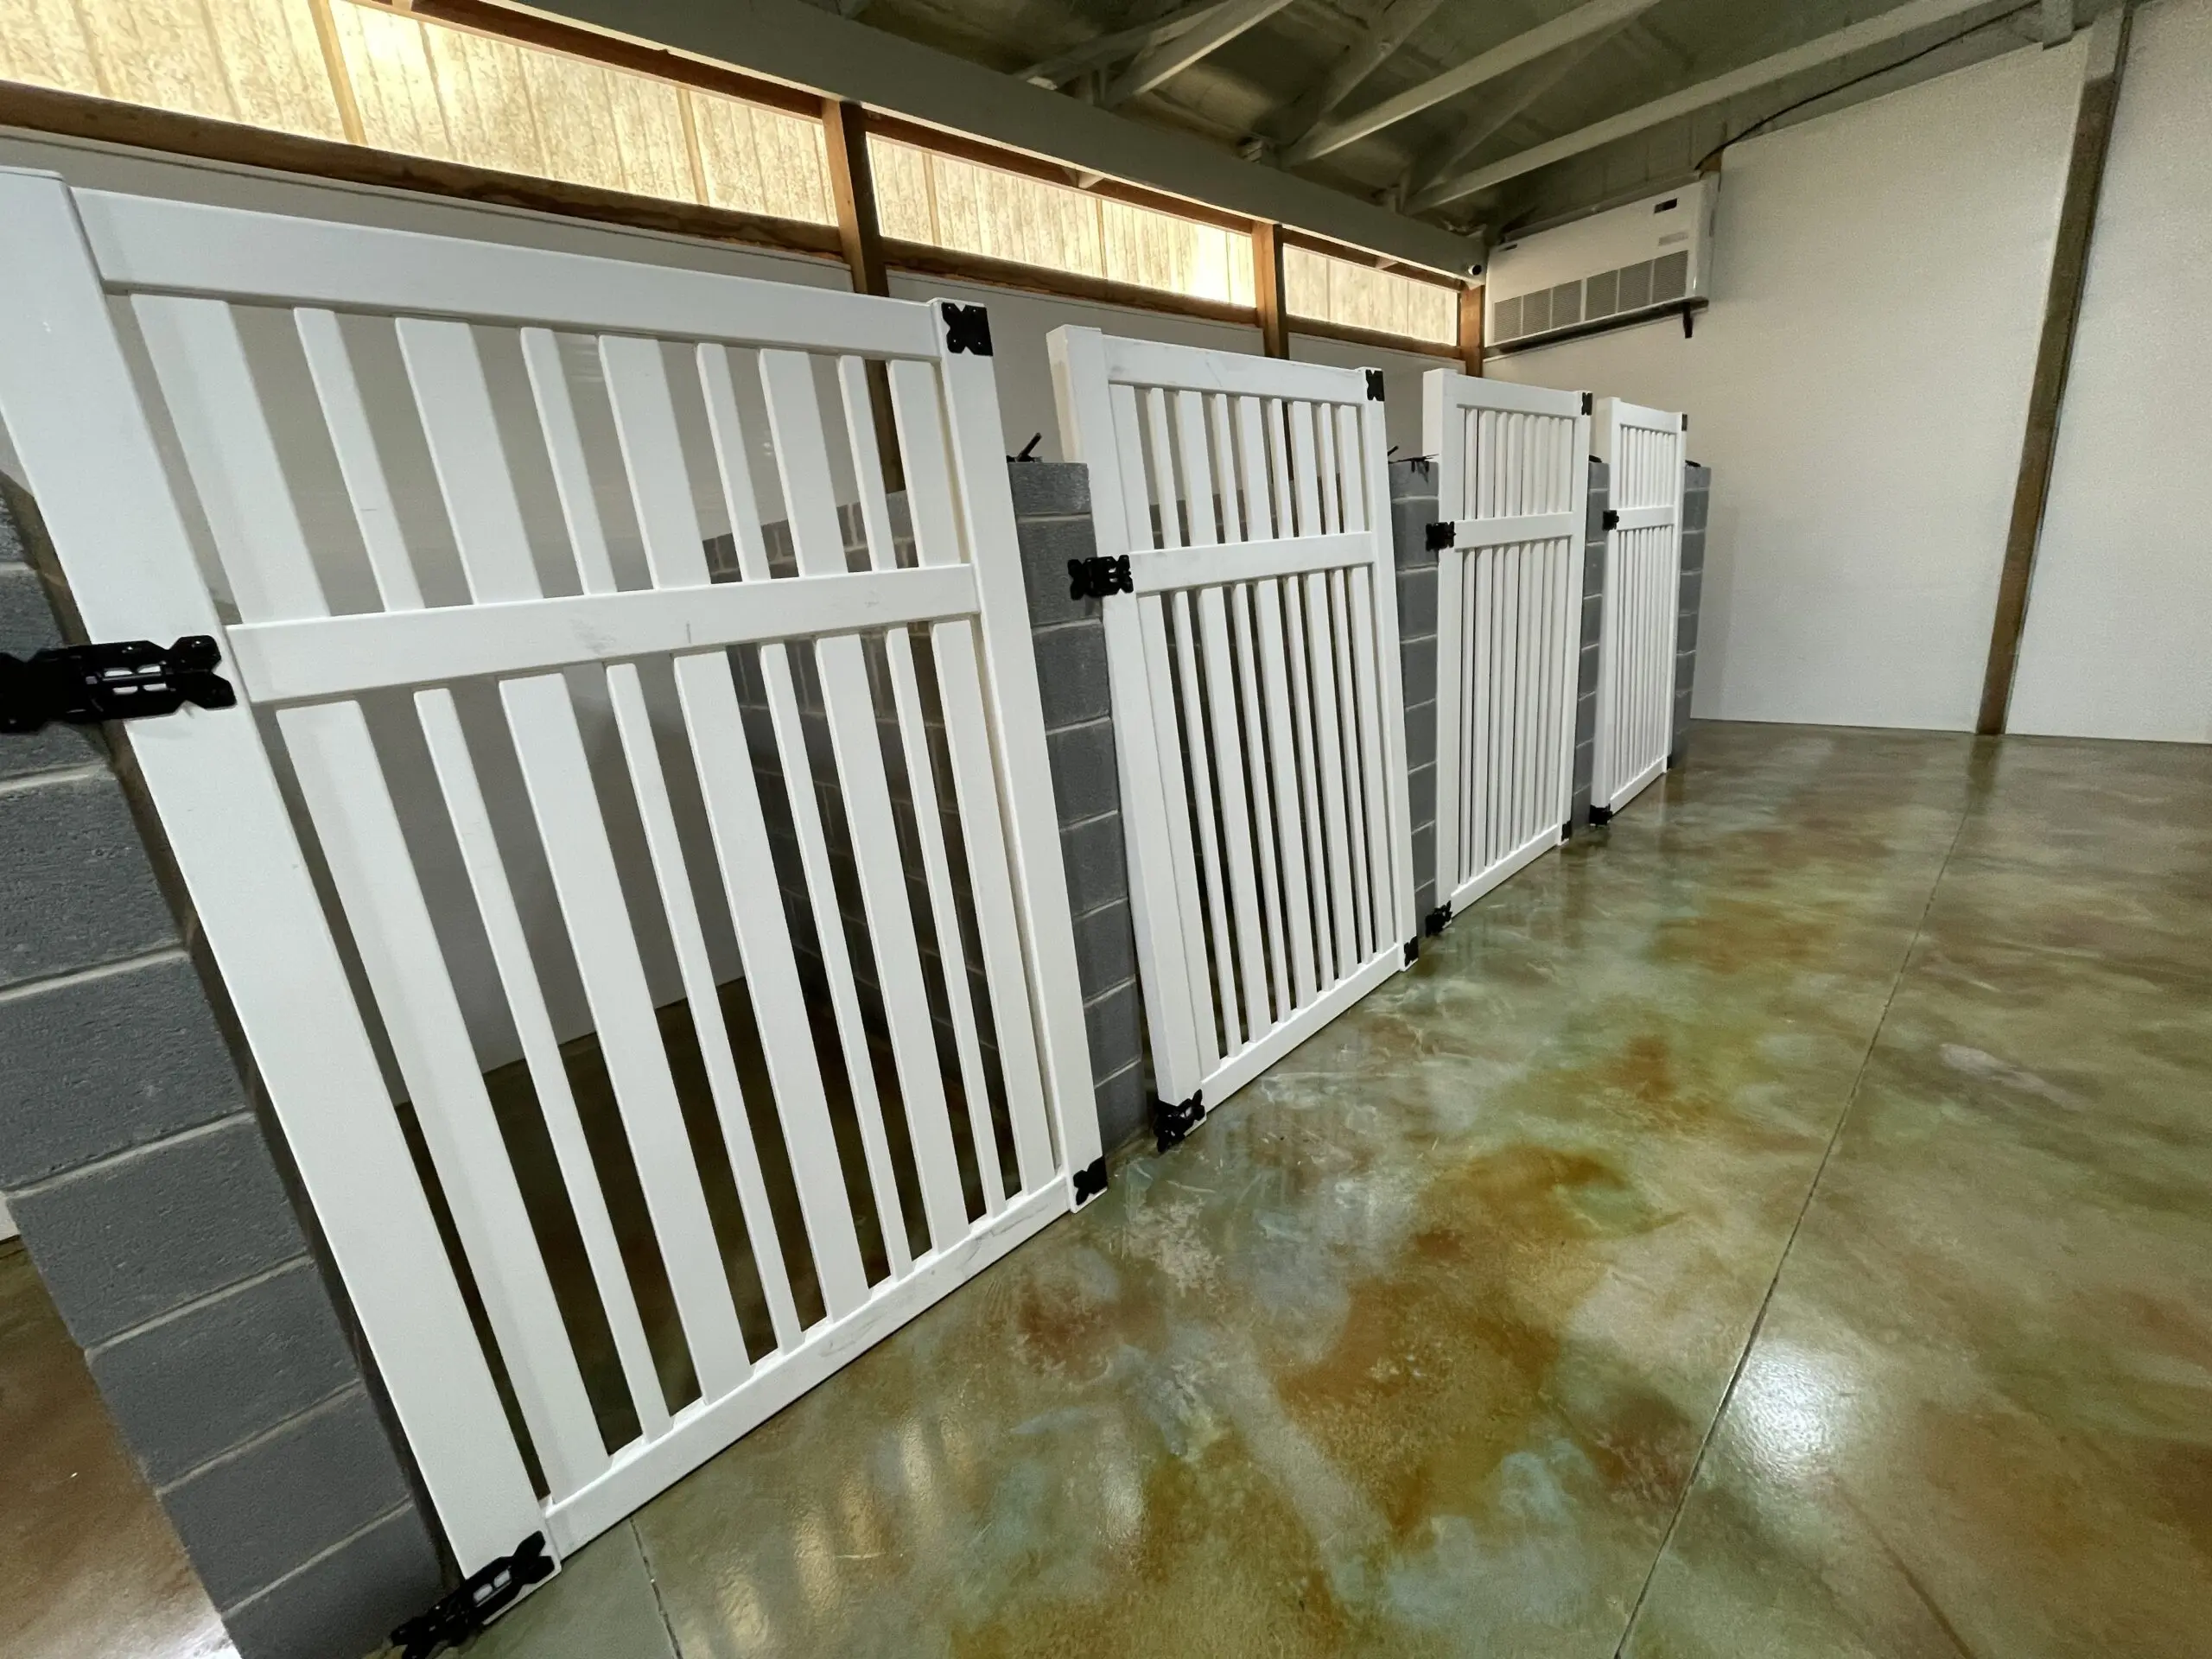 stained floor showcasing its green marbleized finish around the designated dog stall areas